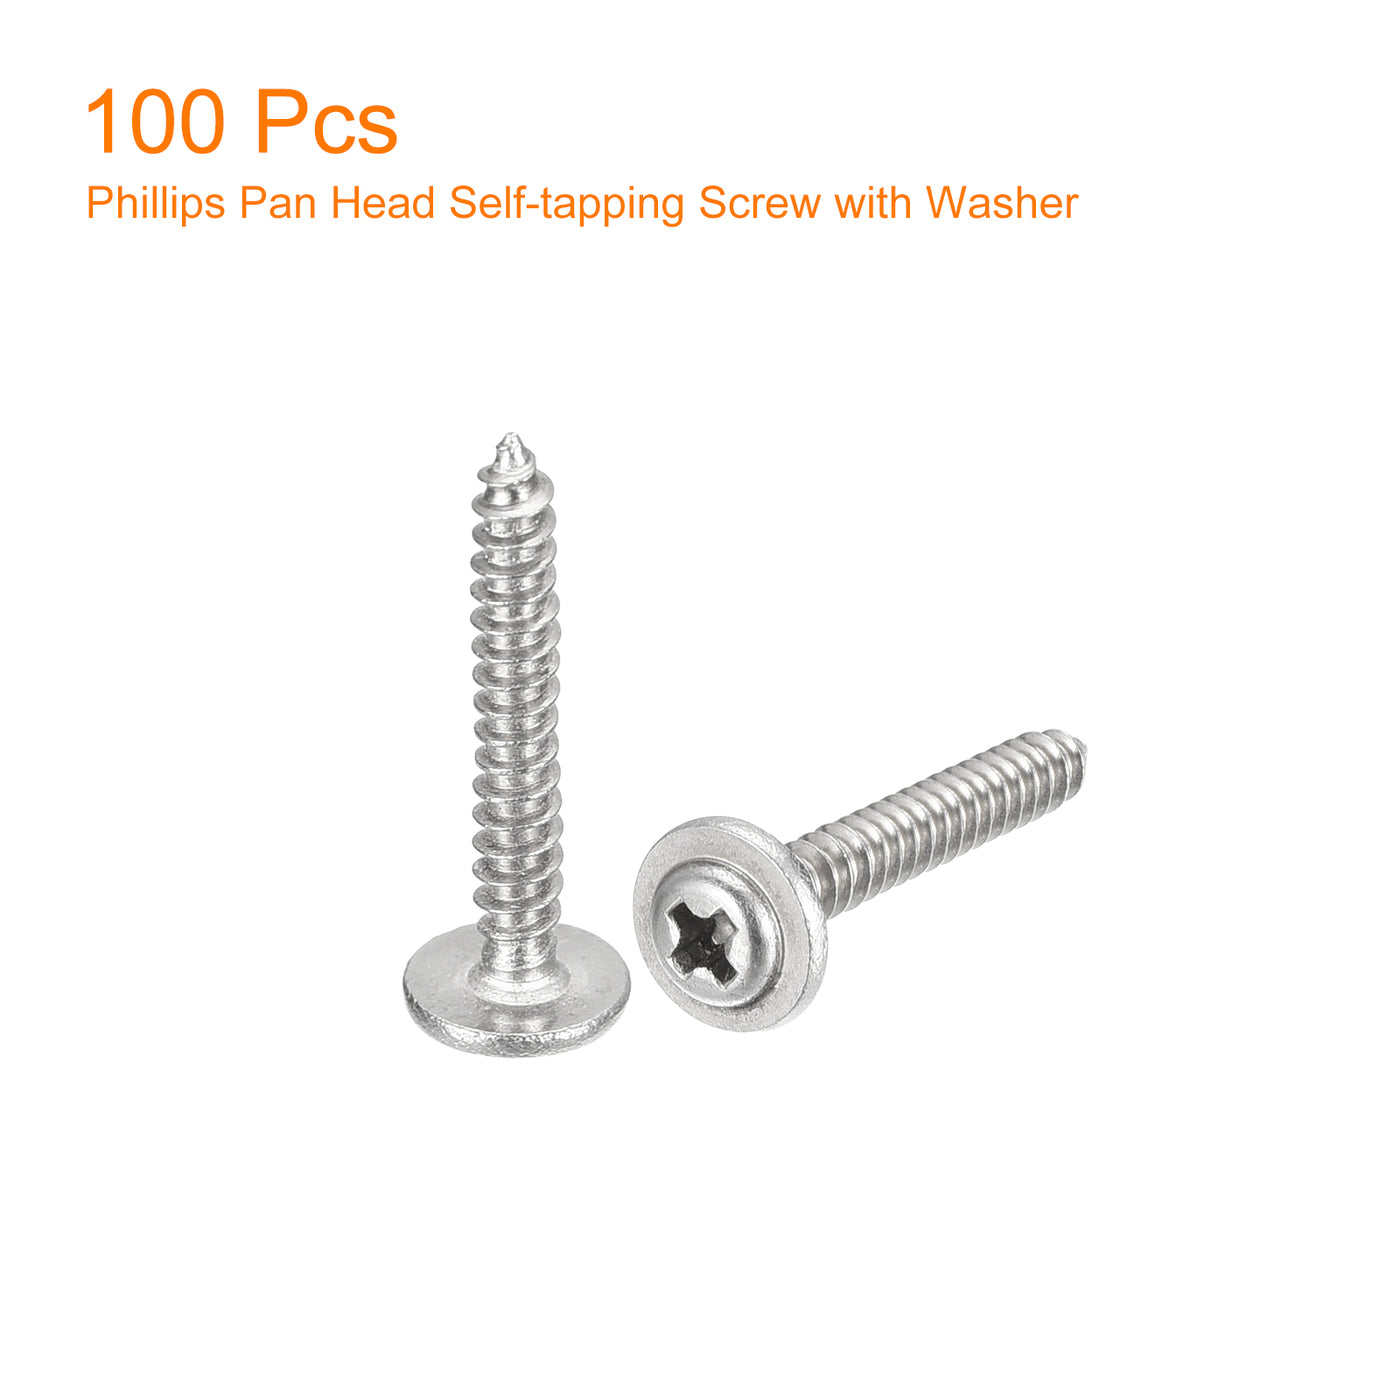 uxcell Uxcell ST2.3x16mm Phillips Pan Head Self-tapping Screw with Washer, 100pcs - 304 Stainless Steel Wood Screw Full Thread (Silver)